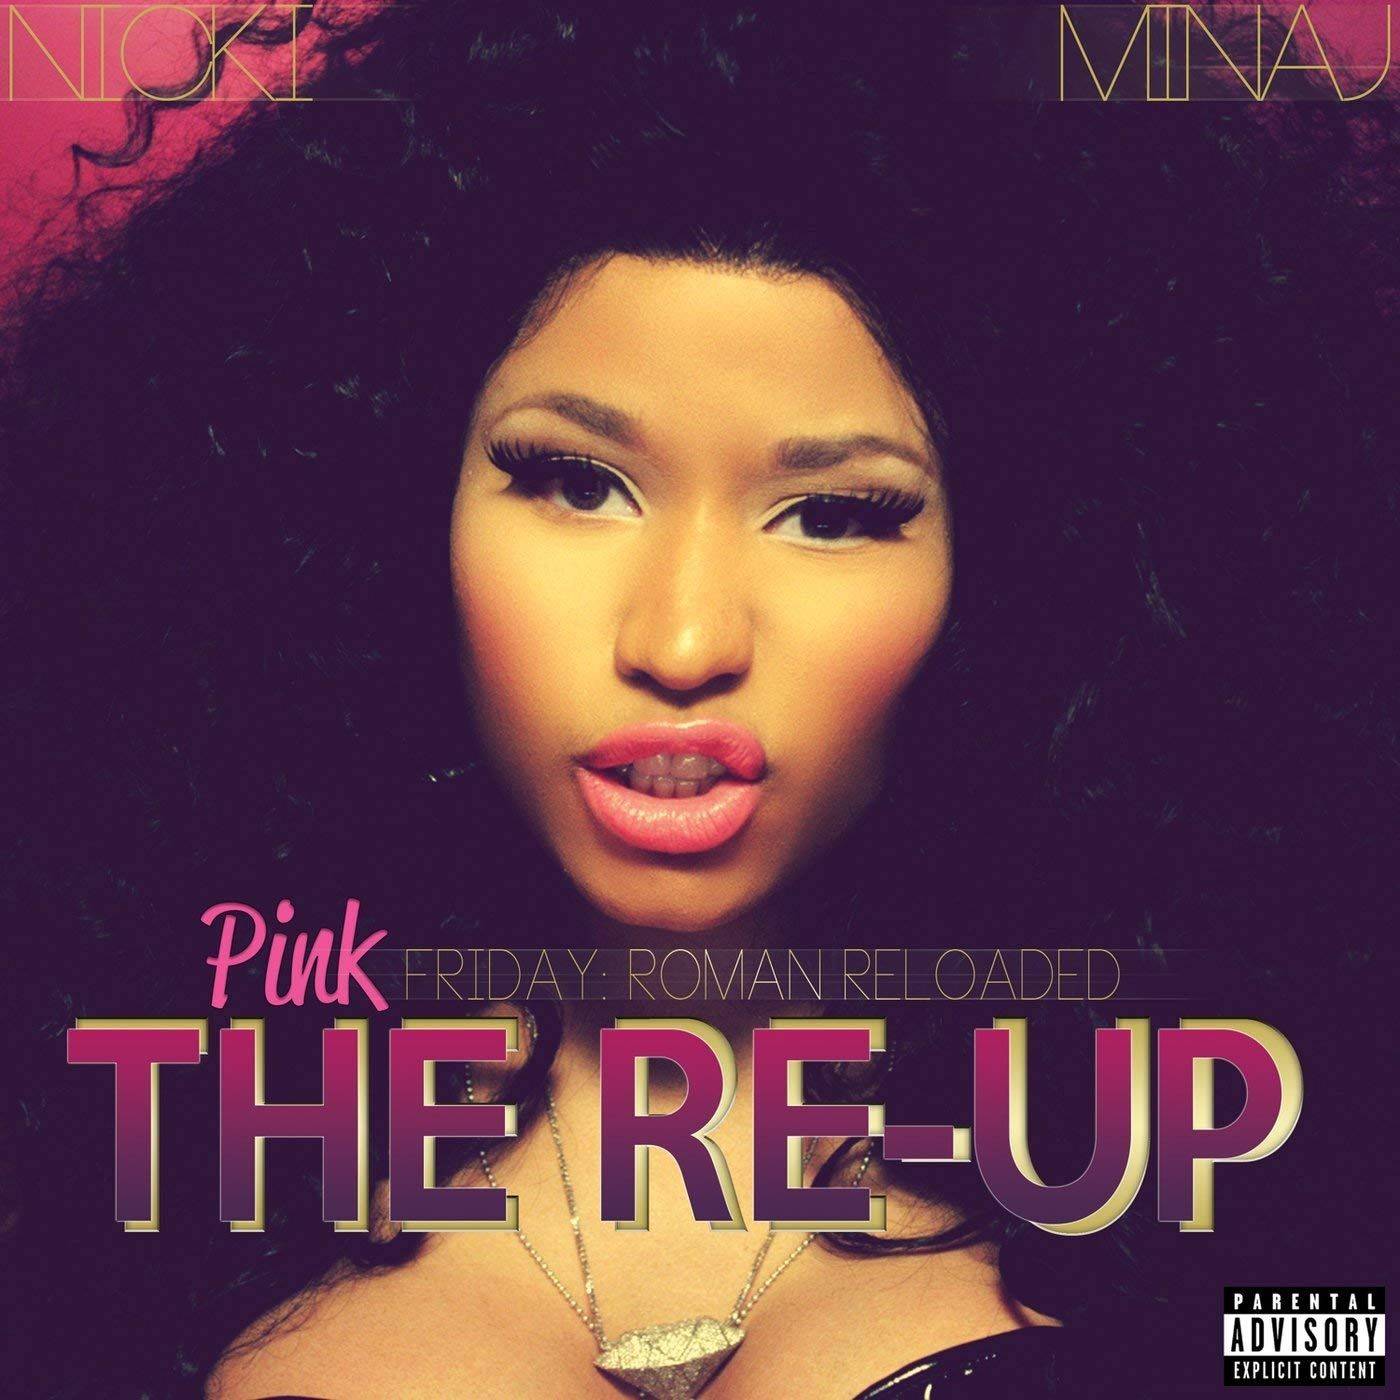 Pink Friday: Roman Reloaded, The Re-Up